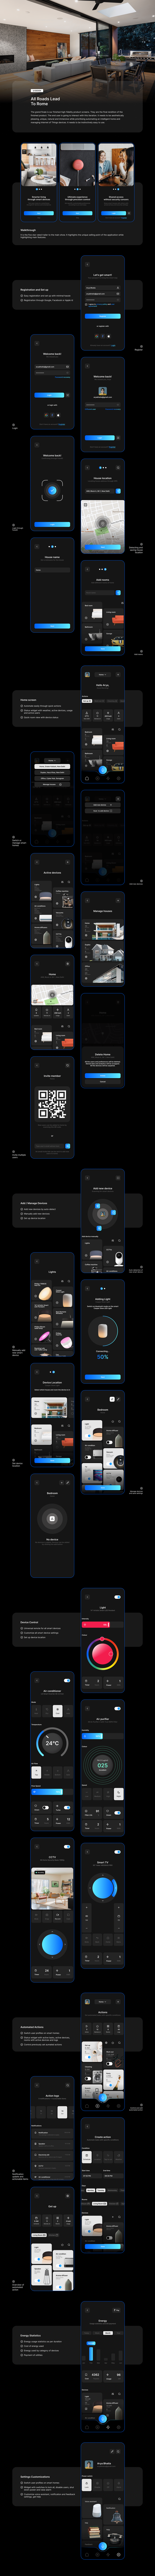 app design application Figma Interface Mobile app UI/UX user experience user interface ux uxdesign